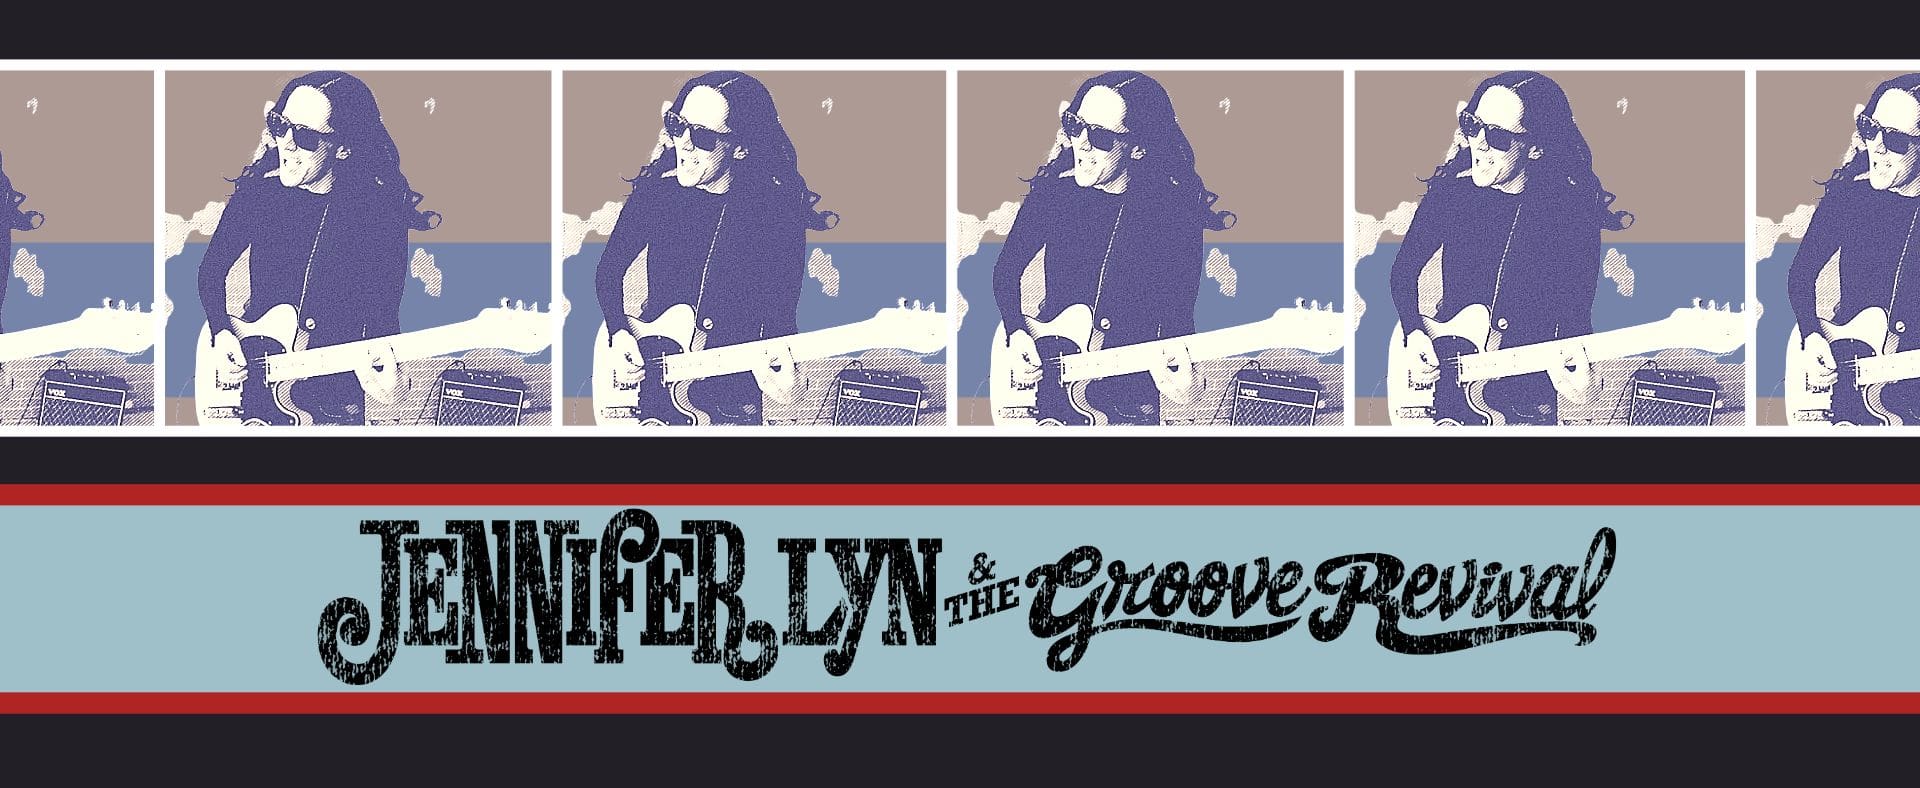 ABOUT Jennifer Lyn and The Groove Revival